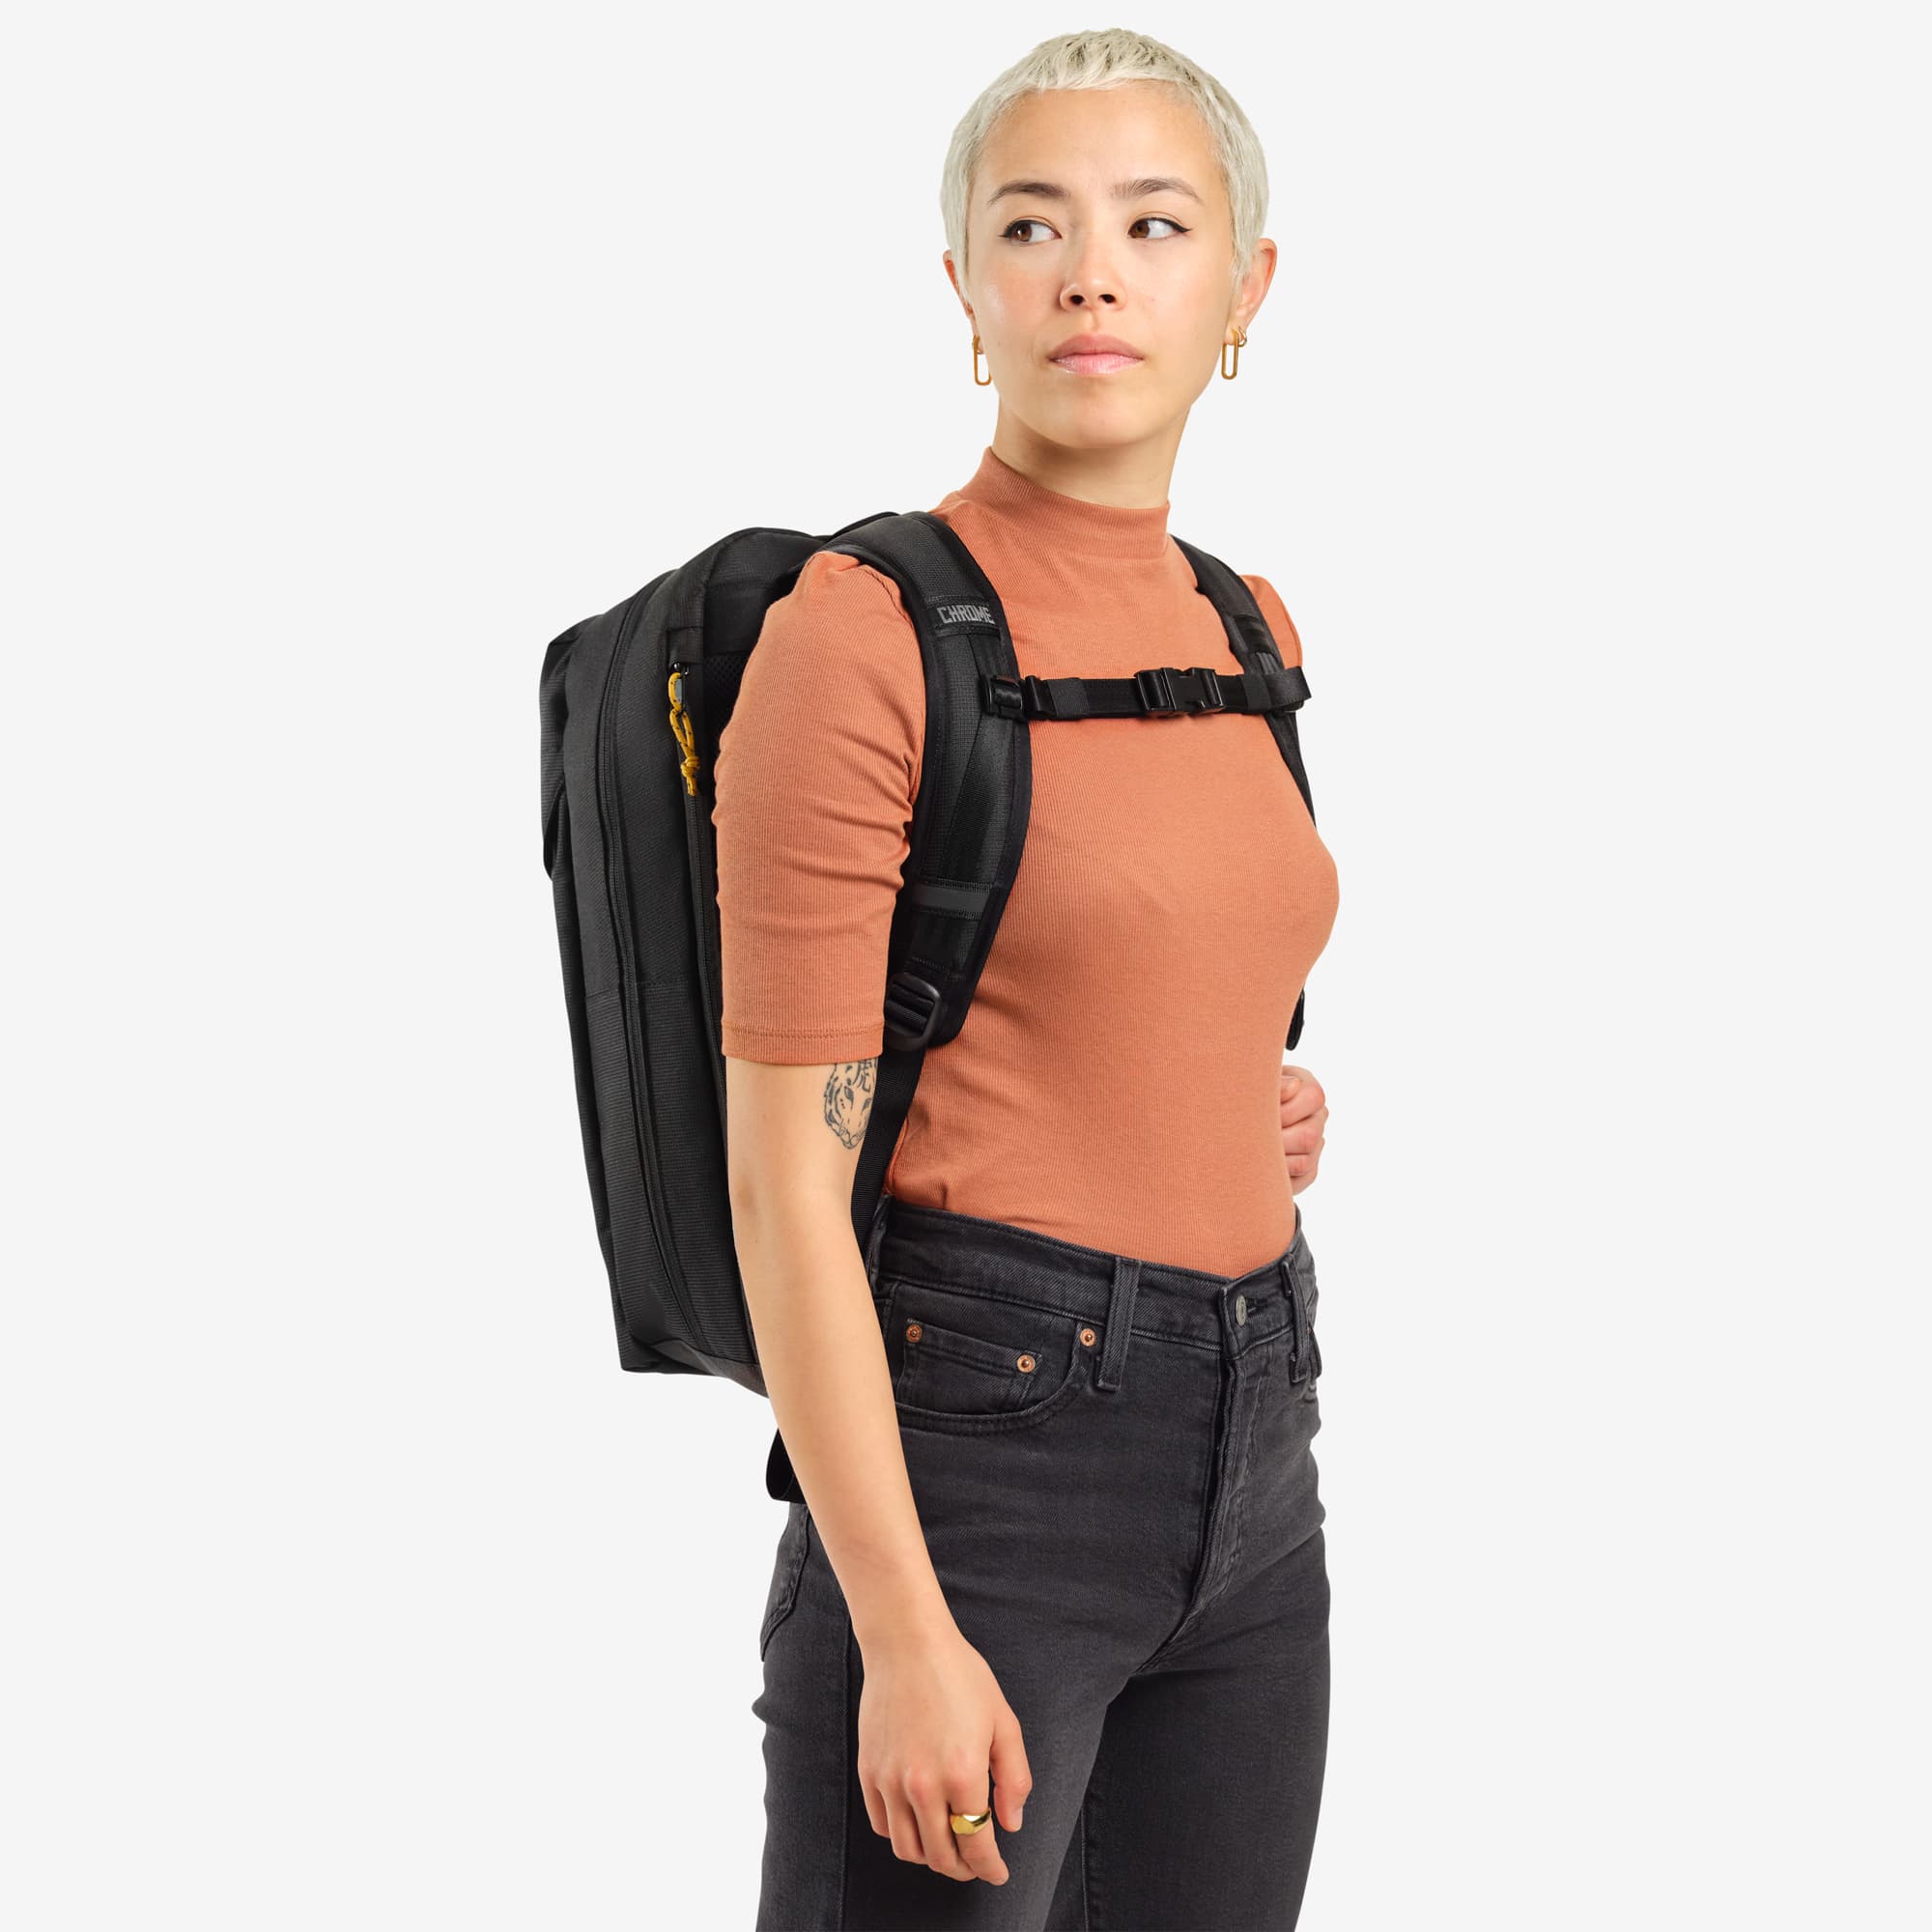 Ruckas 23L Backpack in black worn by a woman side view #color_black